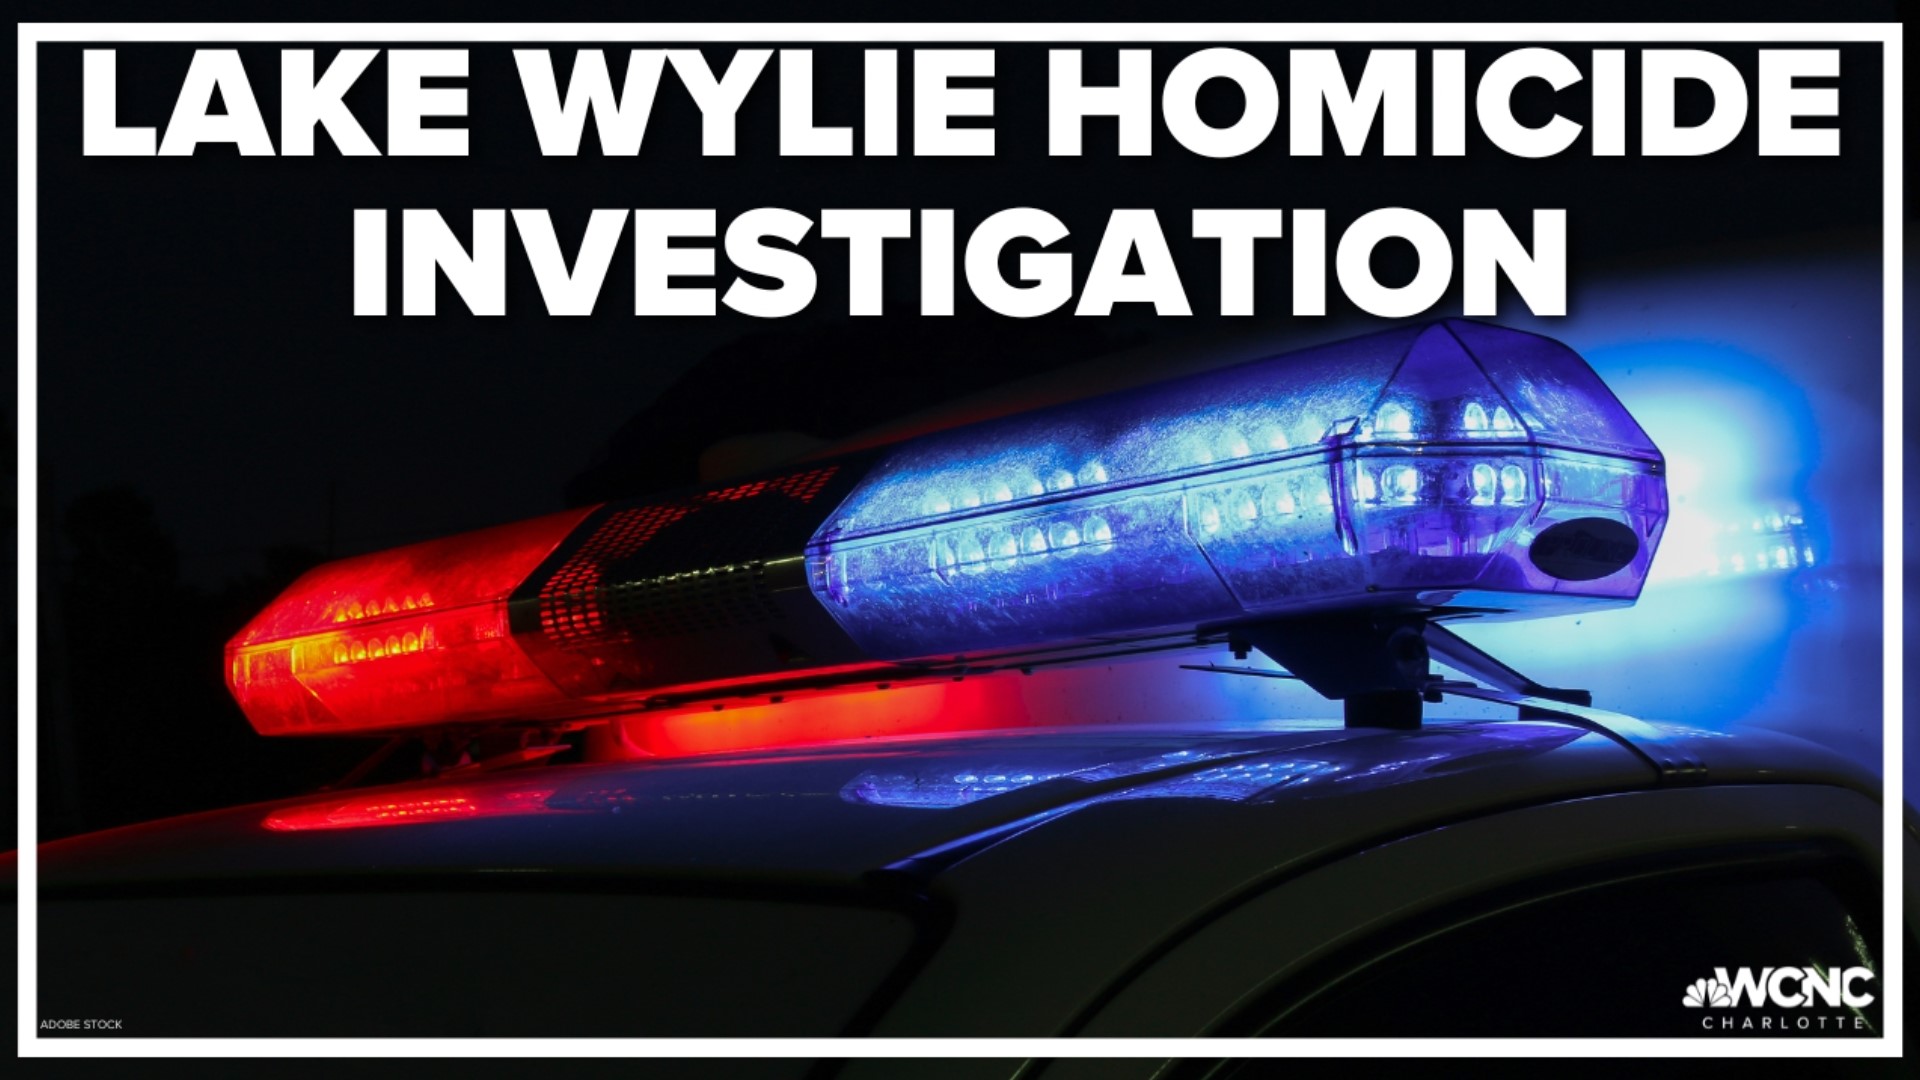 A homicide investigation is now underway after a man was found shot to death at a park in Lake Wylie earlier this week.